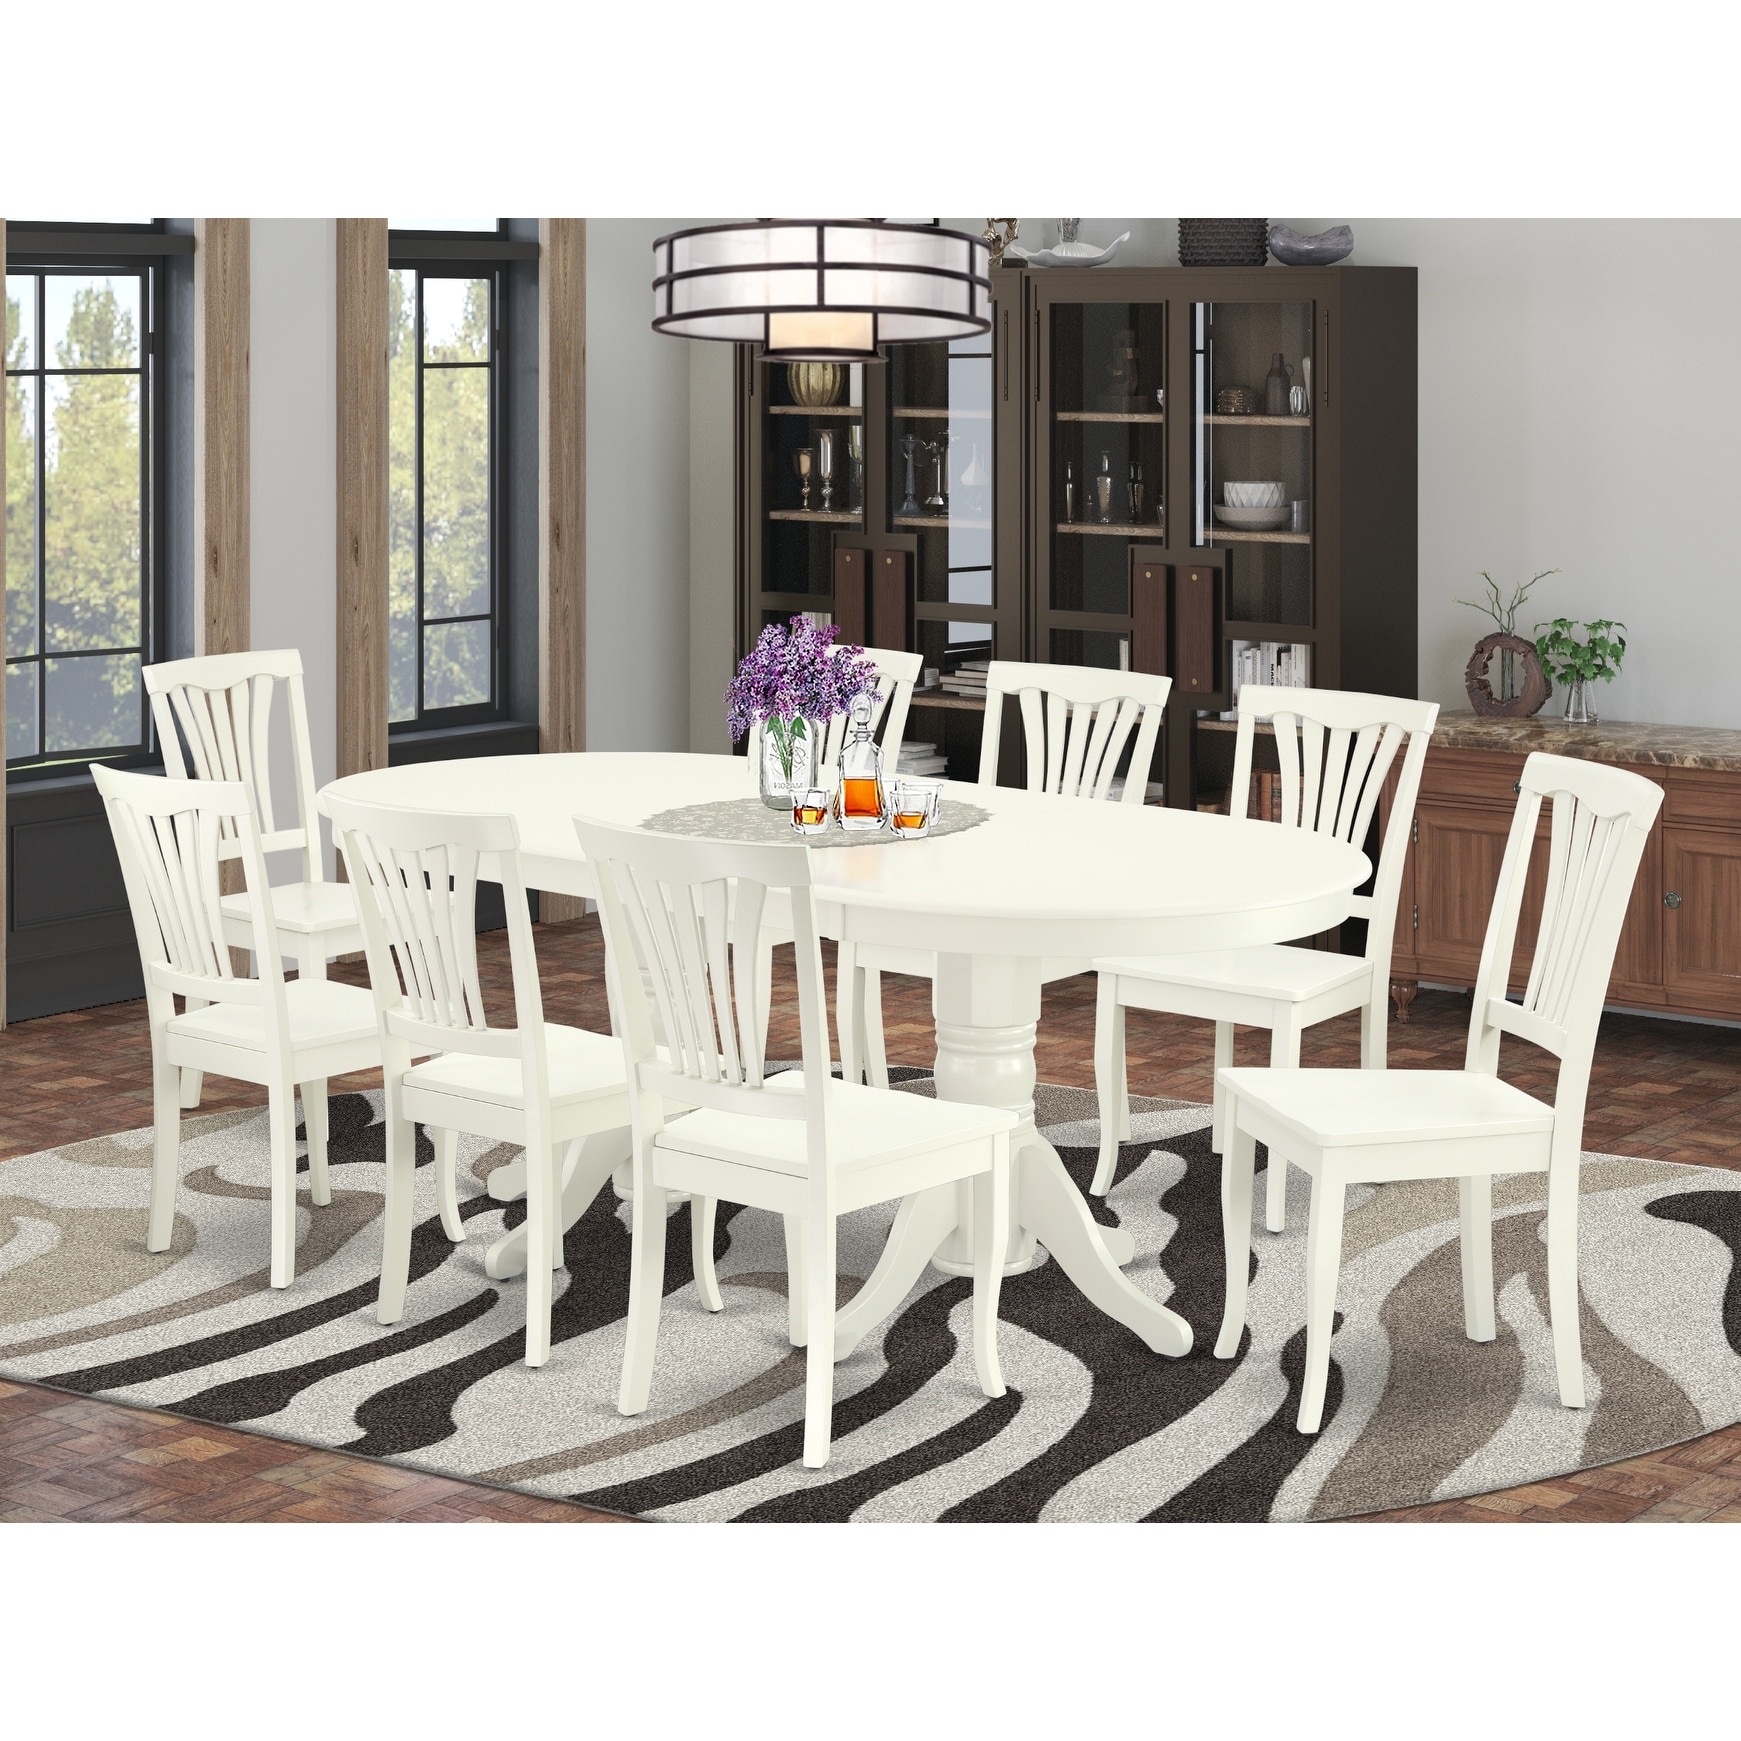 Shop Oval 59 764 Inch Table And Wood Seat Kitchen Chairs In Linen